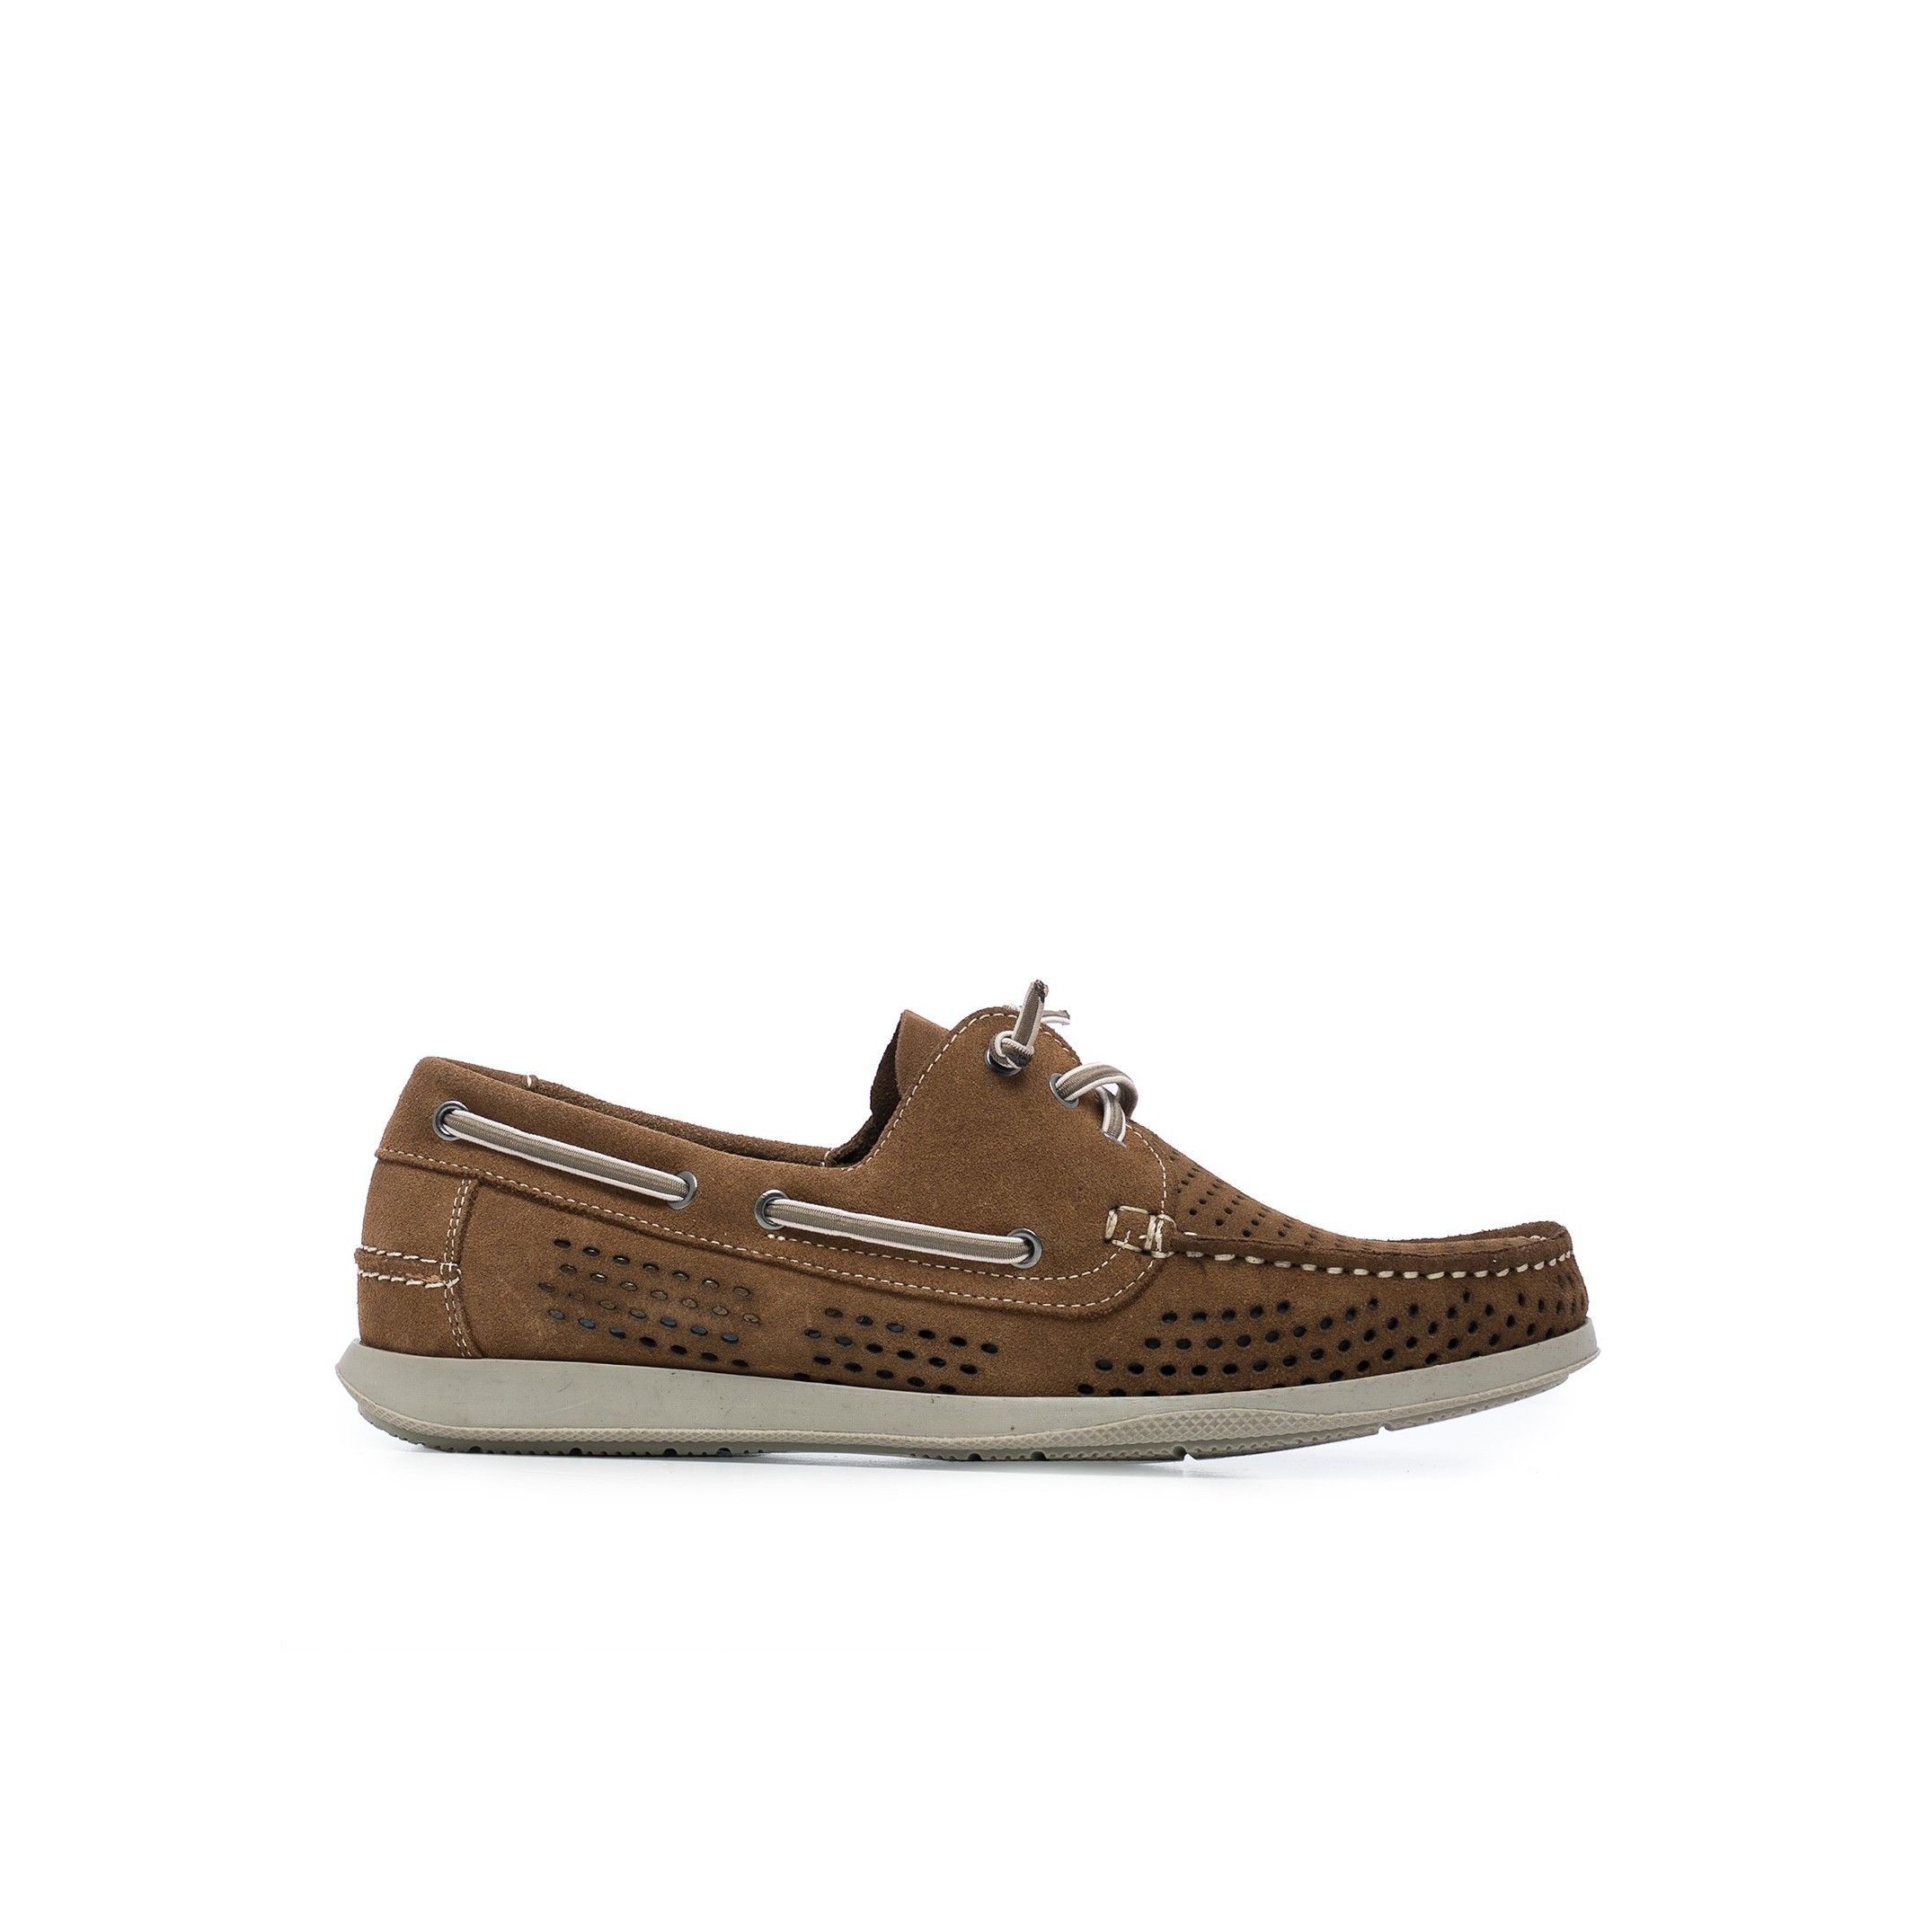 Leather boat shoes, by Son Castellanisimos. Upper made of cowhide leather. Laces closure. Inner and insole made of cowhide leather. Sole material: synthetic and non-slip. Heel height: 1,5 cm. Designed and made in Spain.